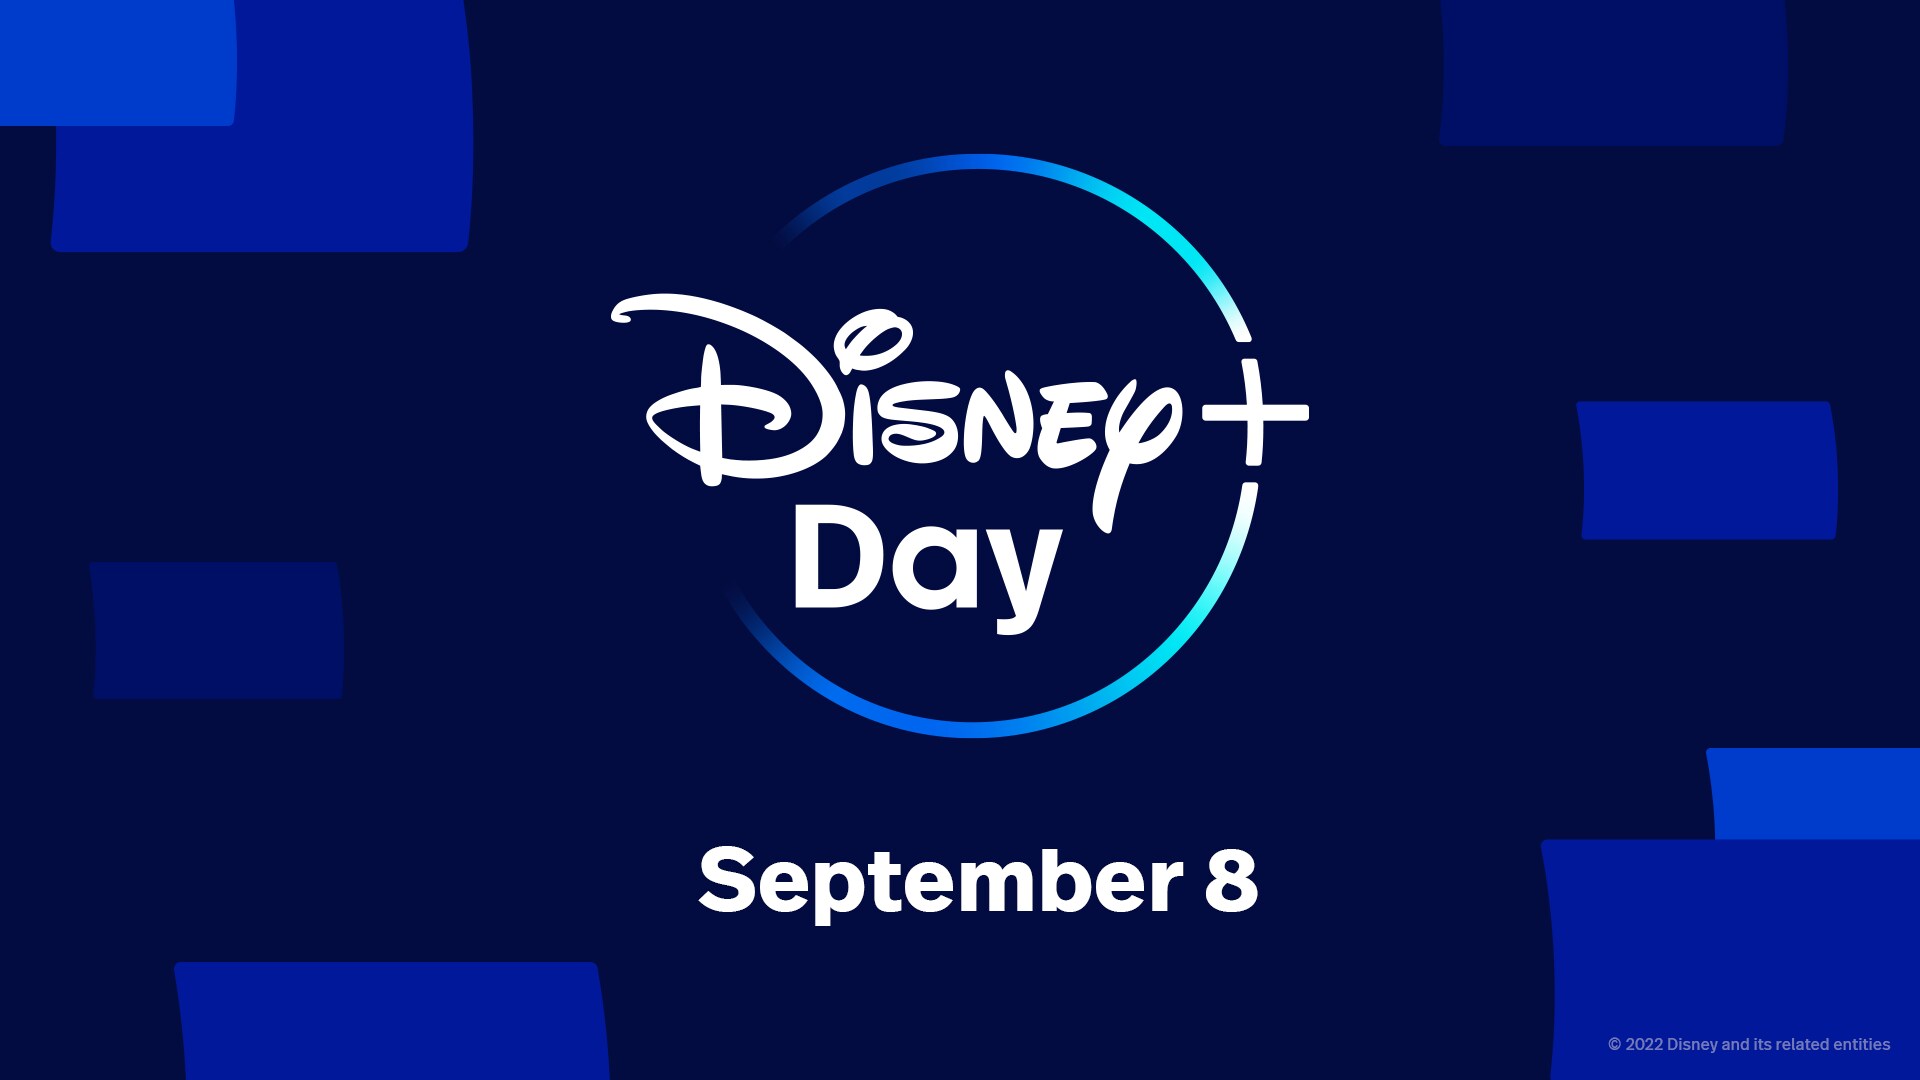 Disney+ Day Kicks Off with the Surprise Release of the Concert Film “BTS: PERMISSION TO DANCE ON STAGE – LA” and a Special Sneak Peek at “Andor”